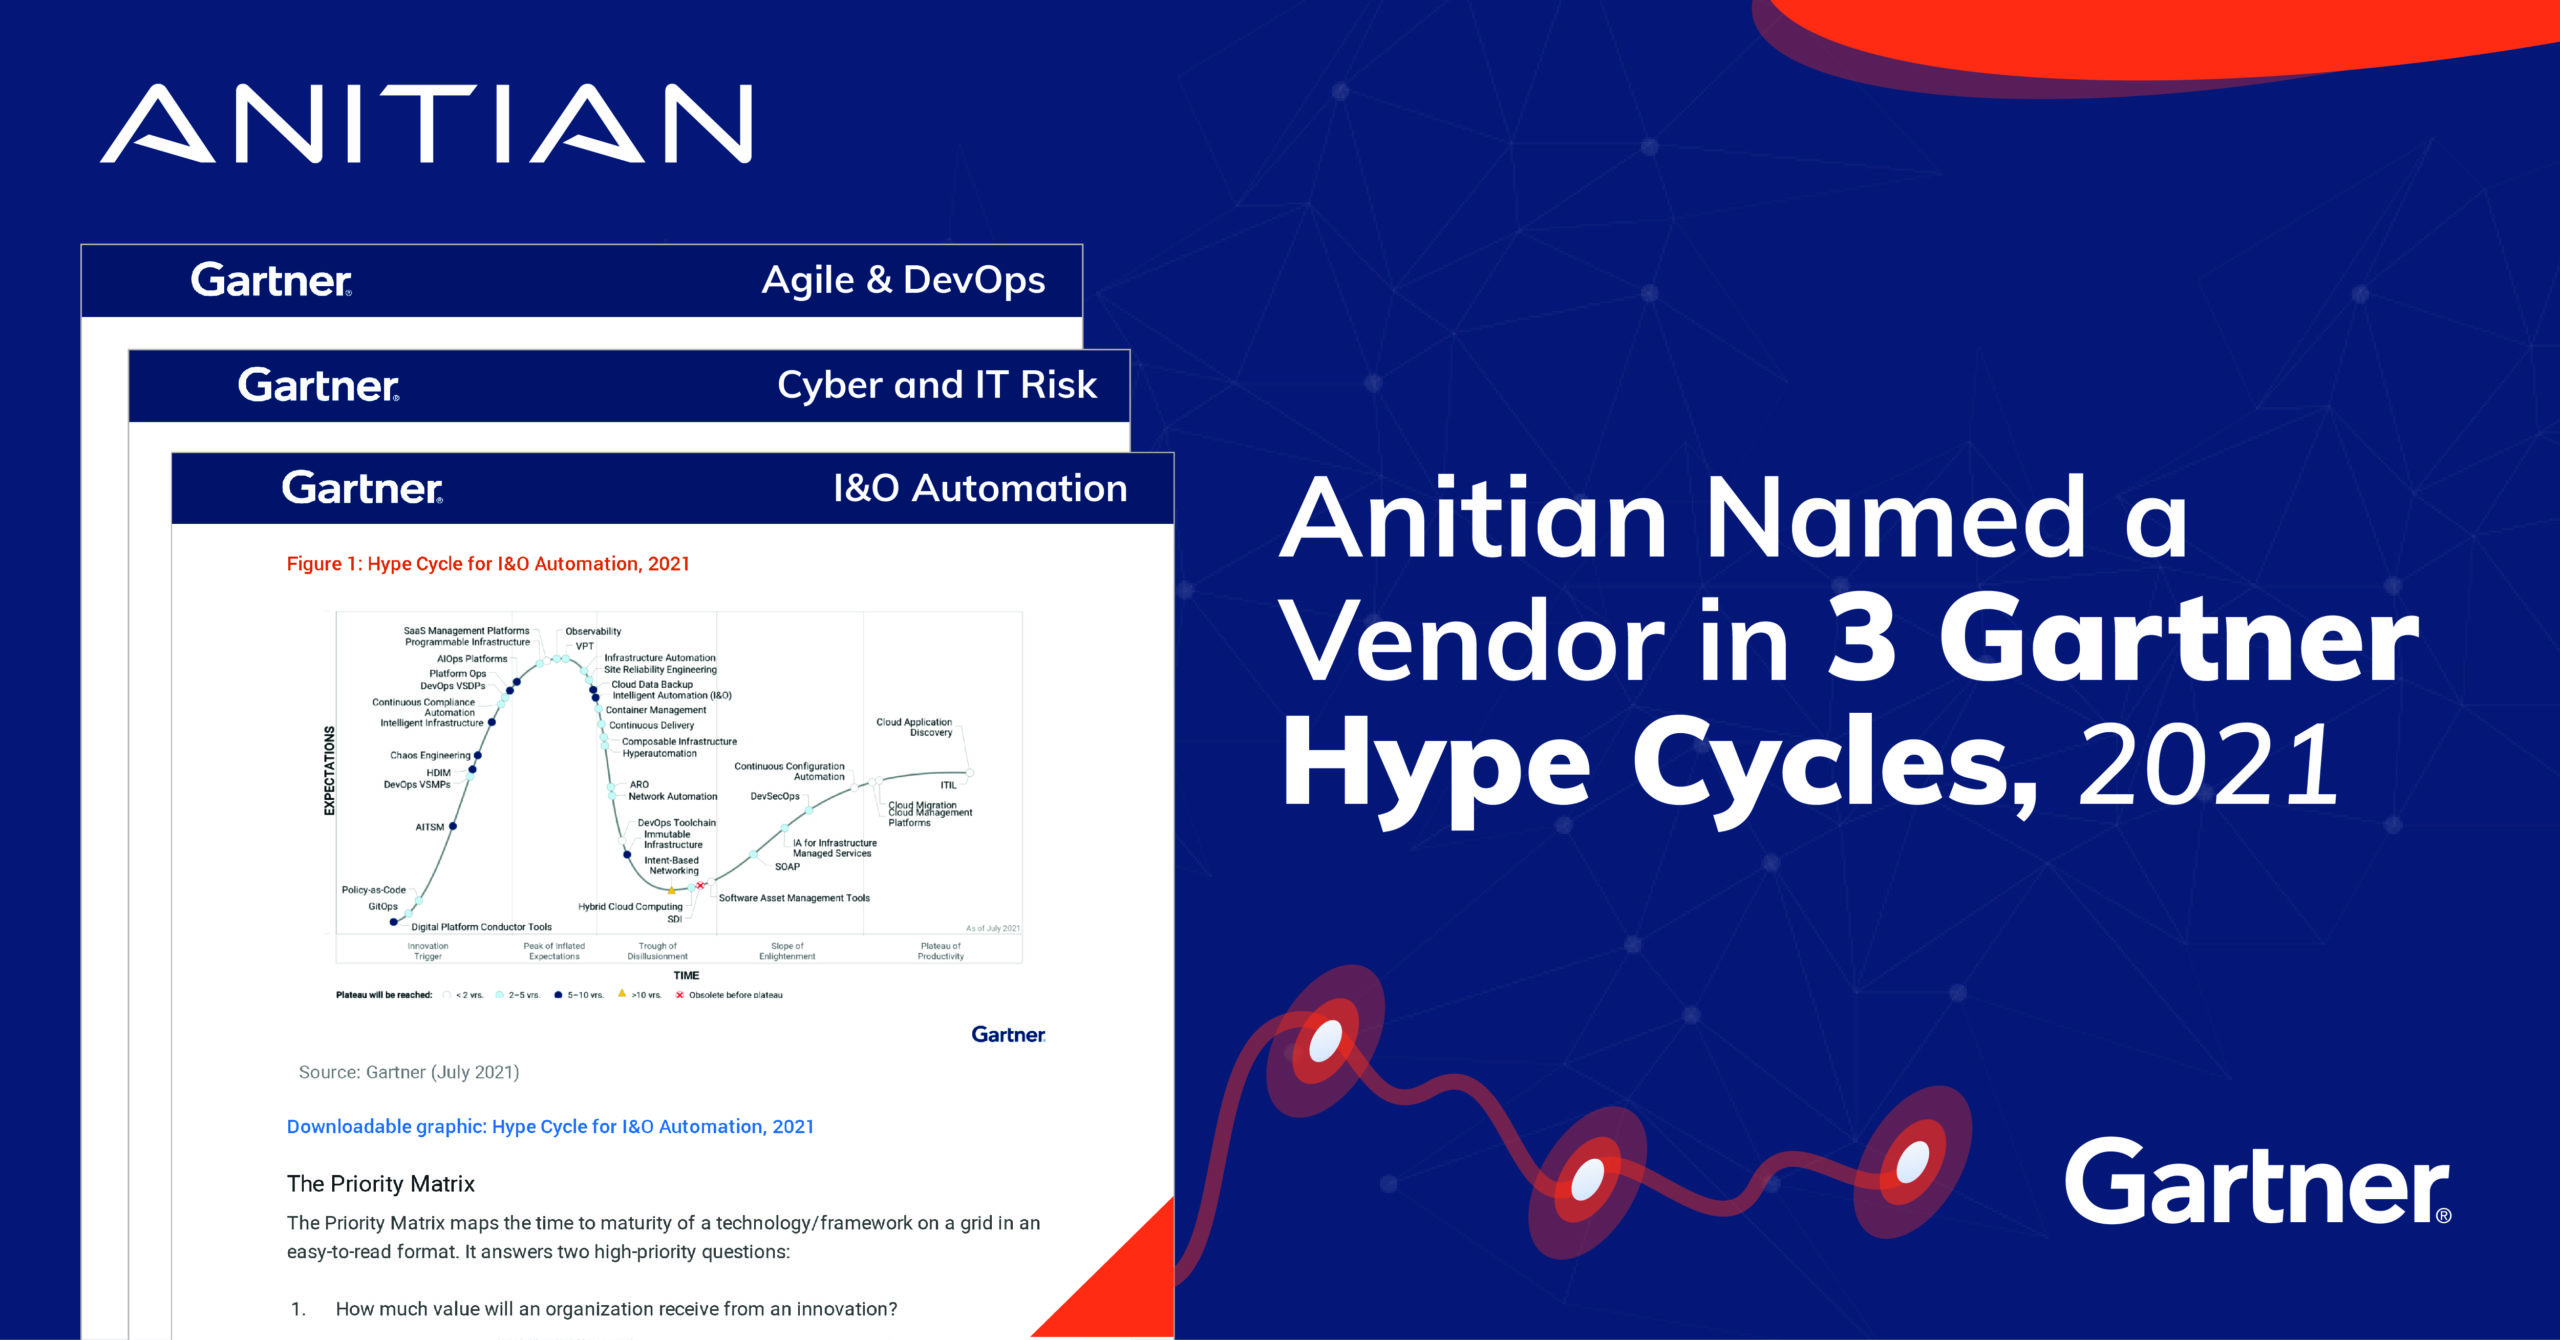 Anitian Recognized as a Vendor in Three Gartner Hype Cycle Reports